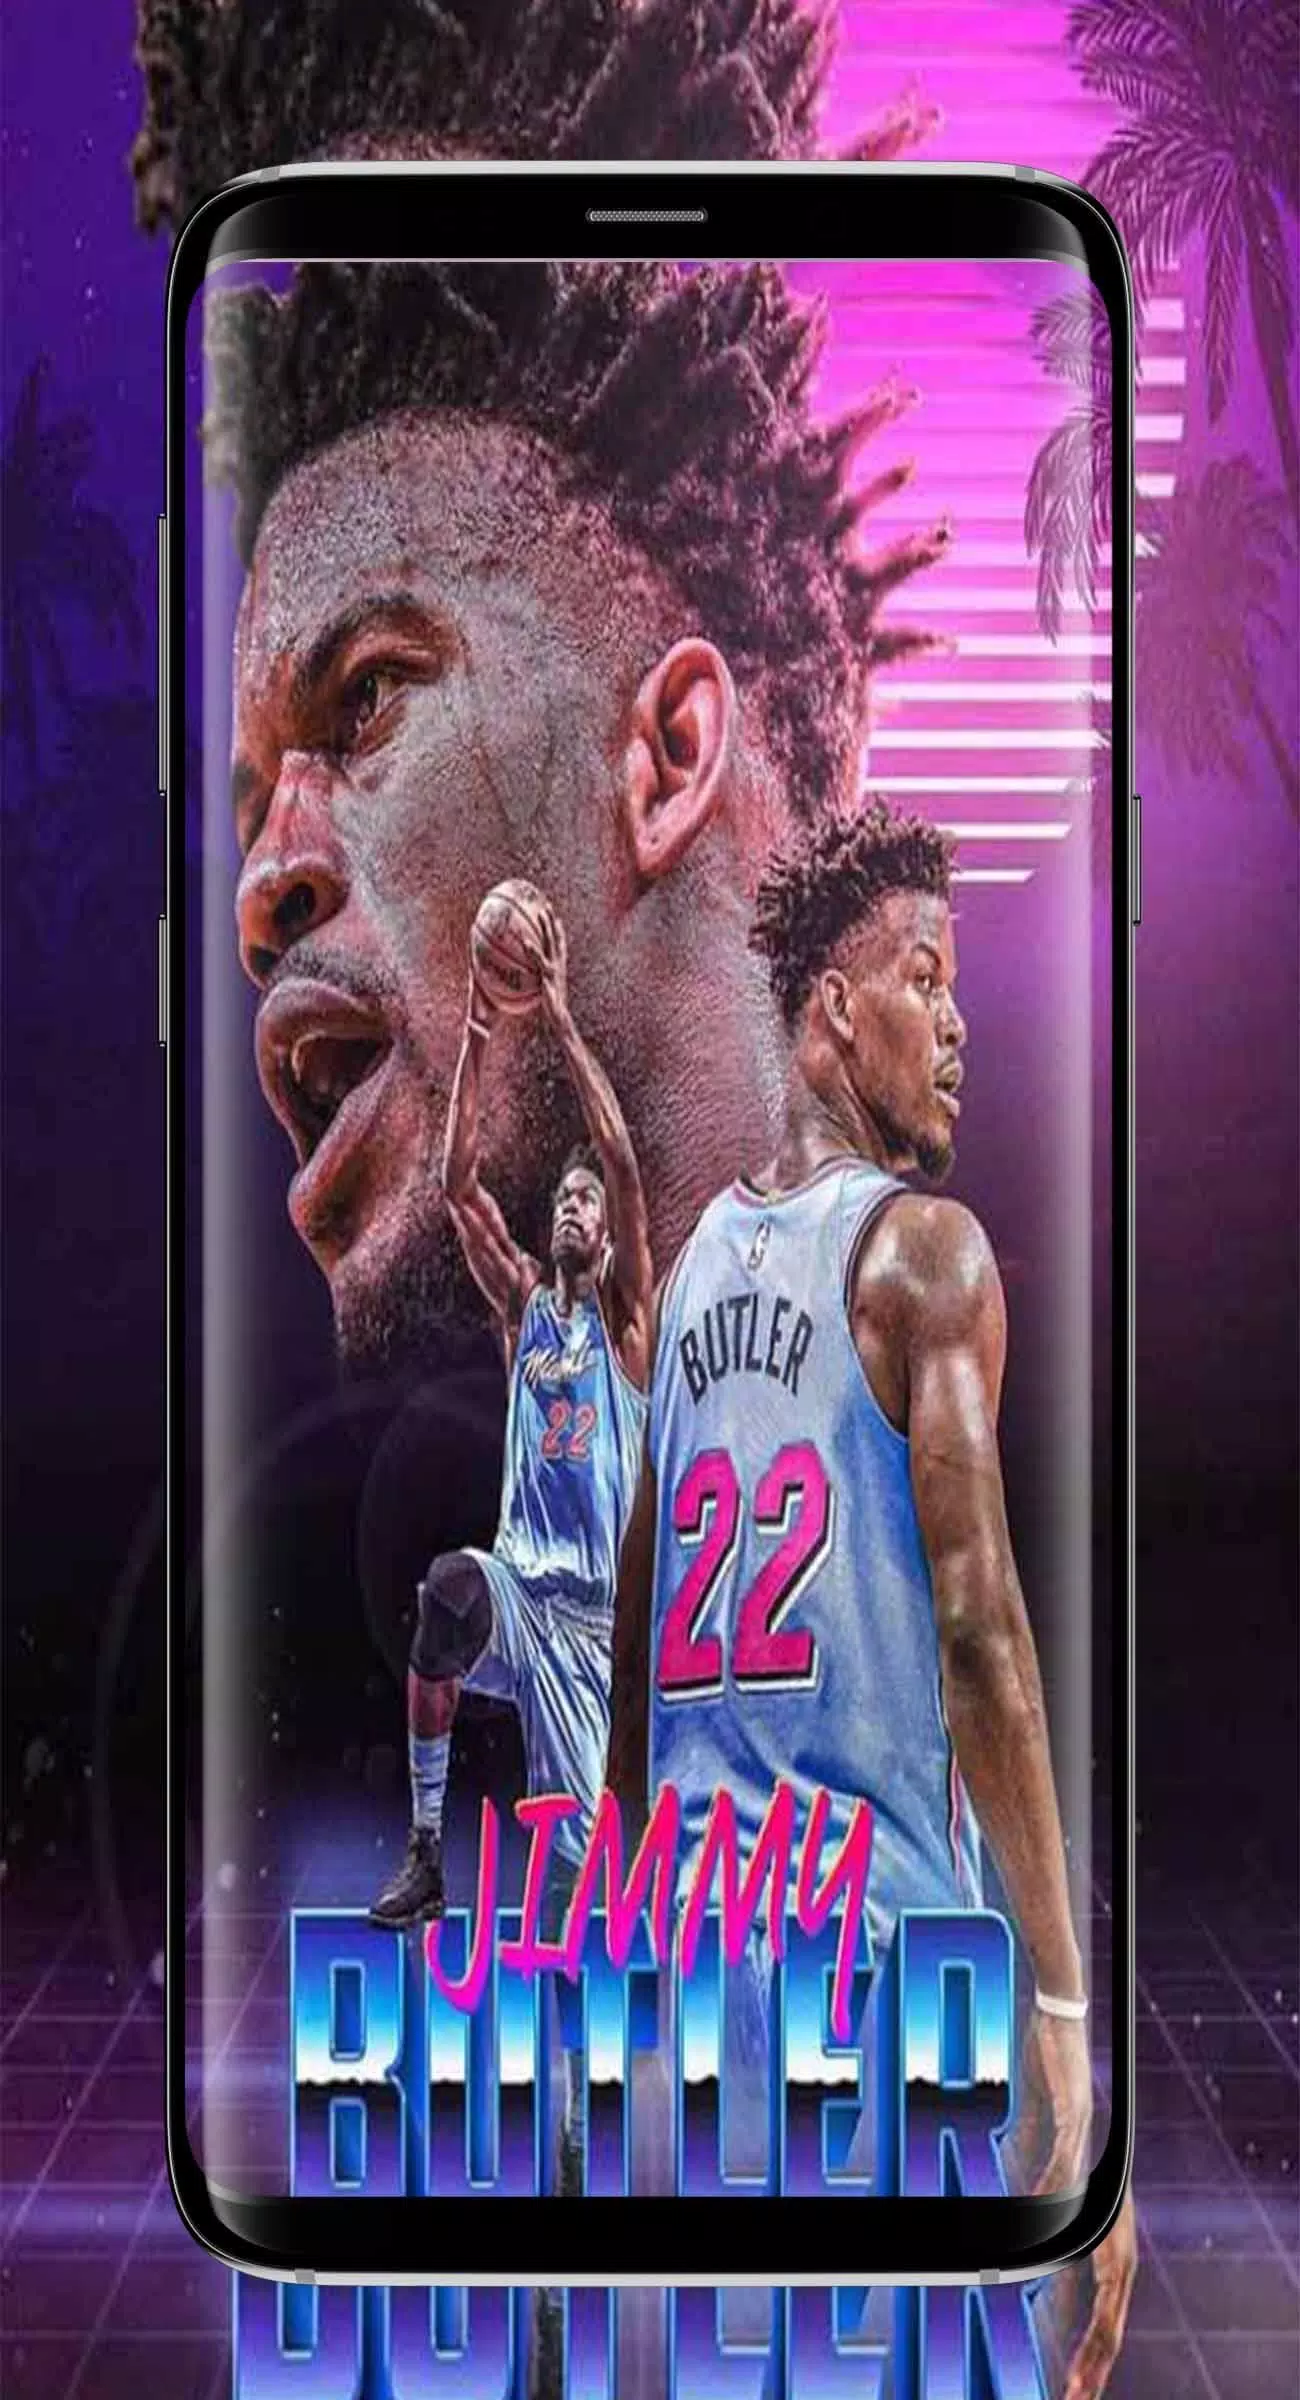 Jimmy Butler Miami Heat NBA Wallpaper New APK for Android Download